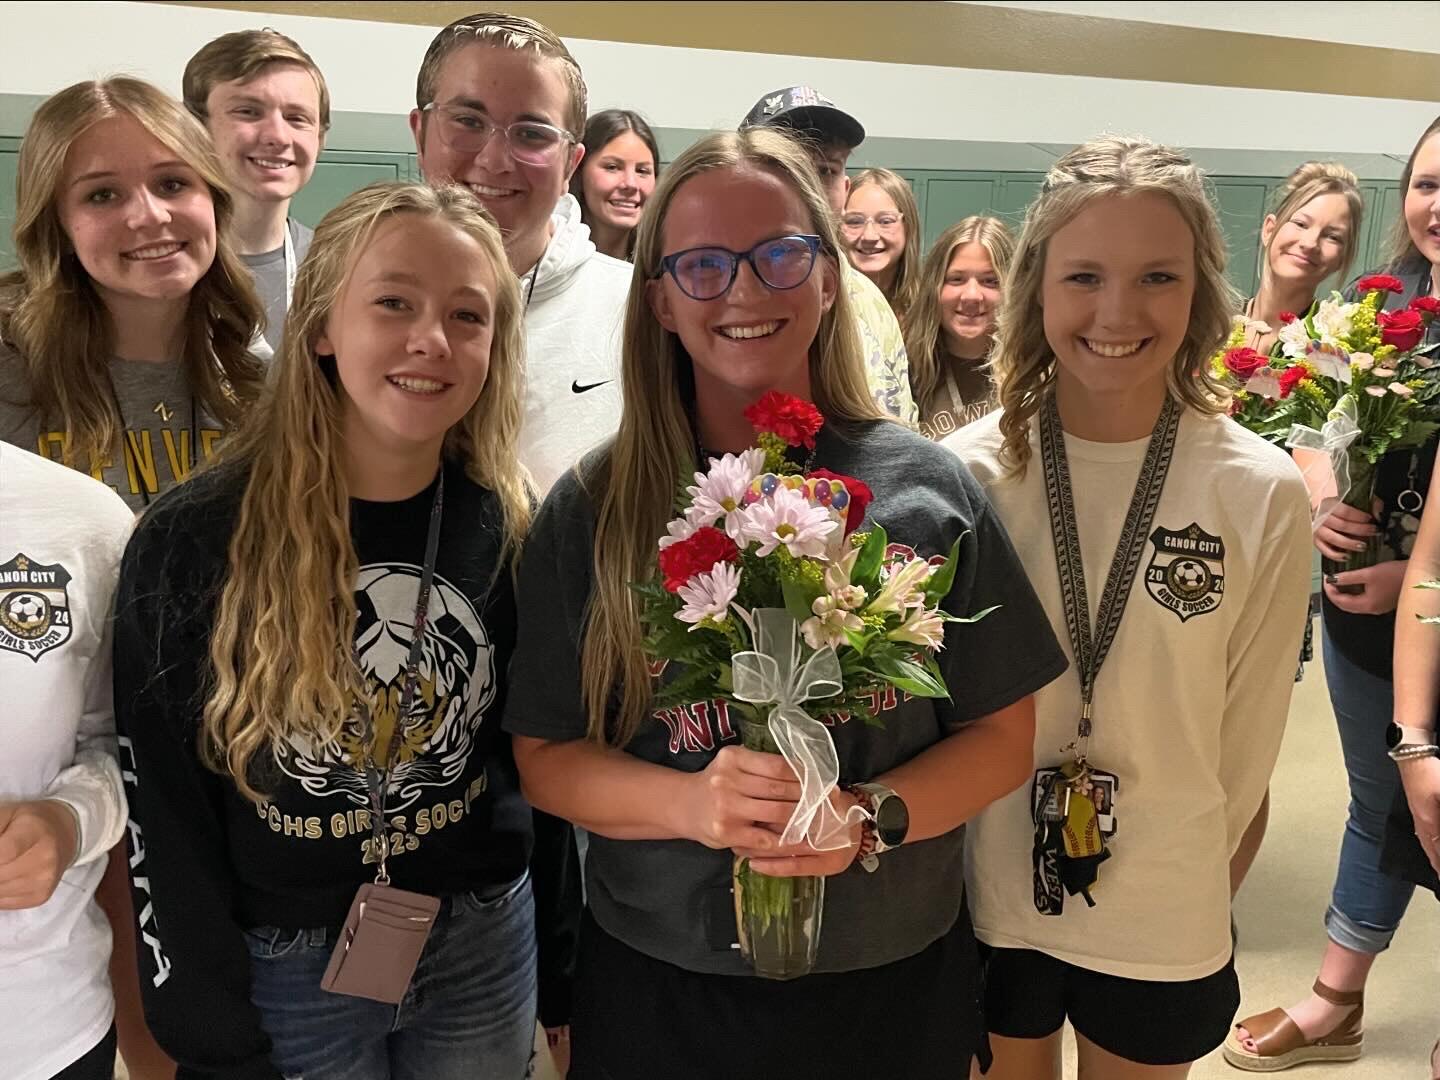 Ms. Lambrecht holding flowers with Student Council Members